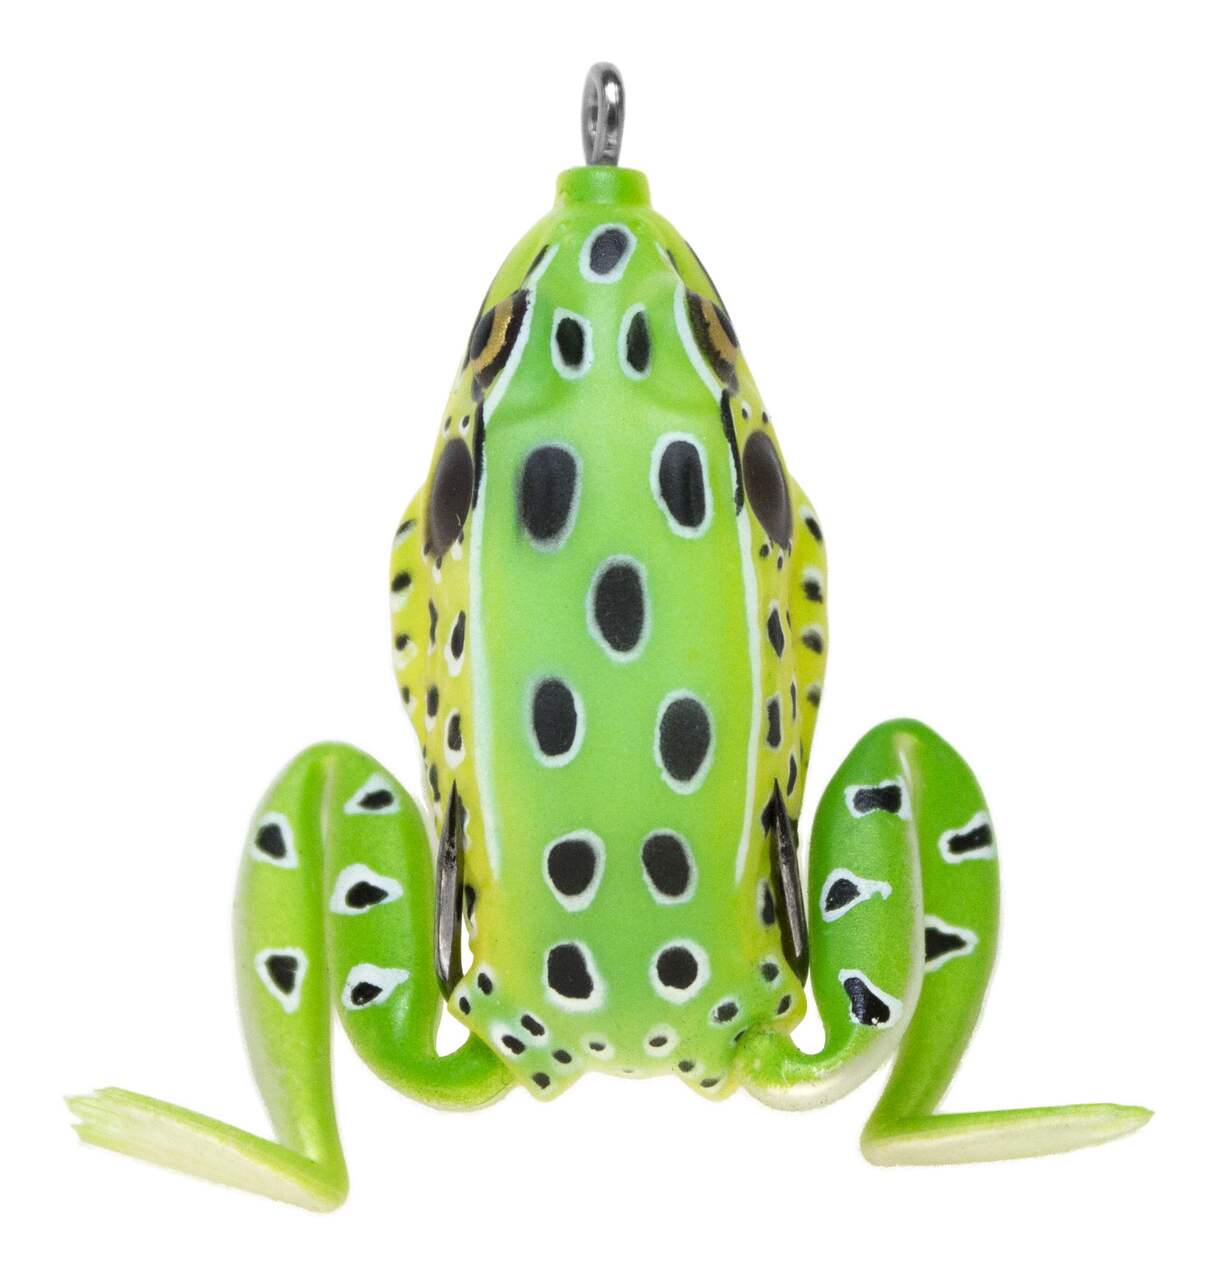 https://media-www.canadiantire.ca/product/playing/fishing/fishing-lures/0778698/lunkerhunt-pocket-frog-1-4-oz-leopard-d3dd0e16-6d51-4240-8c31-2aa8a4f1808f-jpgrendition.jpg?imdensity=1&imwidth=640&impolicy=mZoom